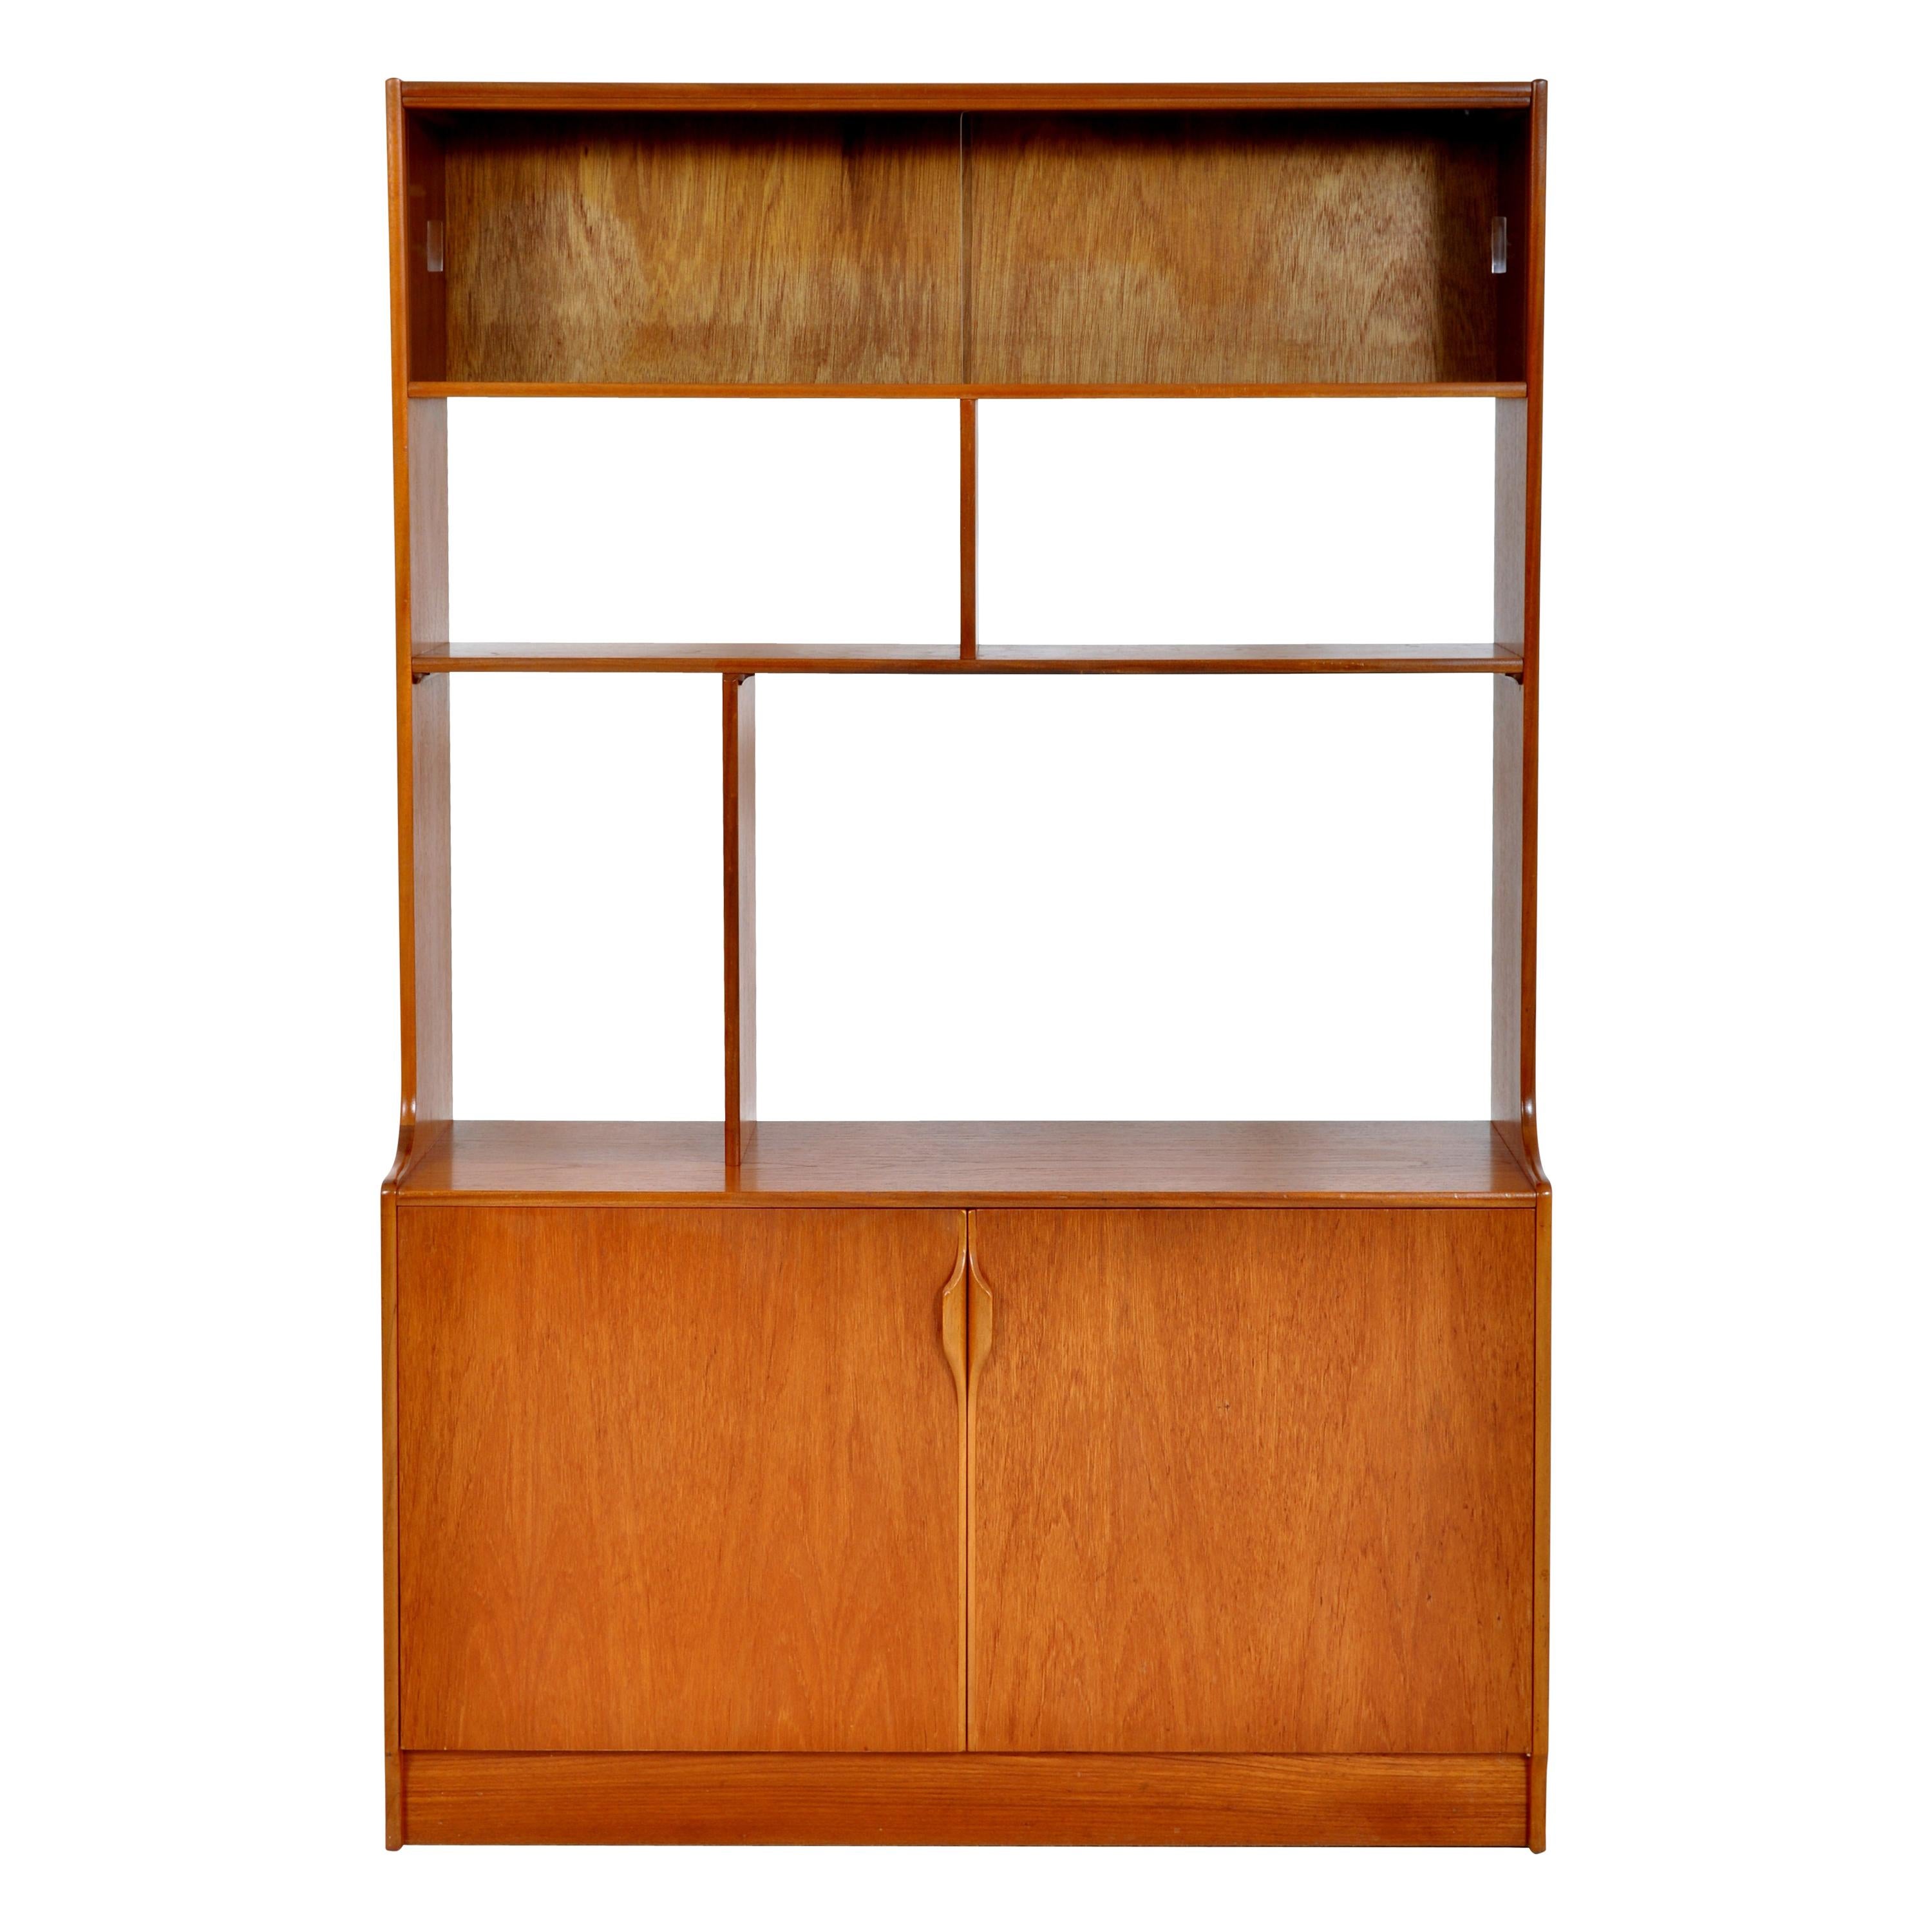 Mid-Century Modern Danish Style Bookcase / Wall Unit / in Teak by S Form, 1960s